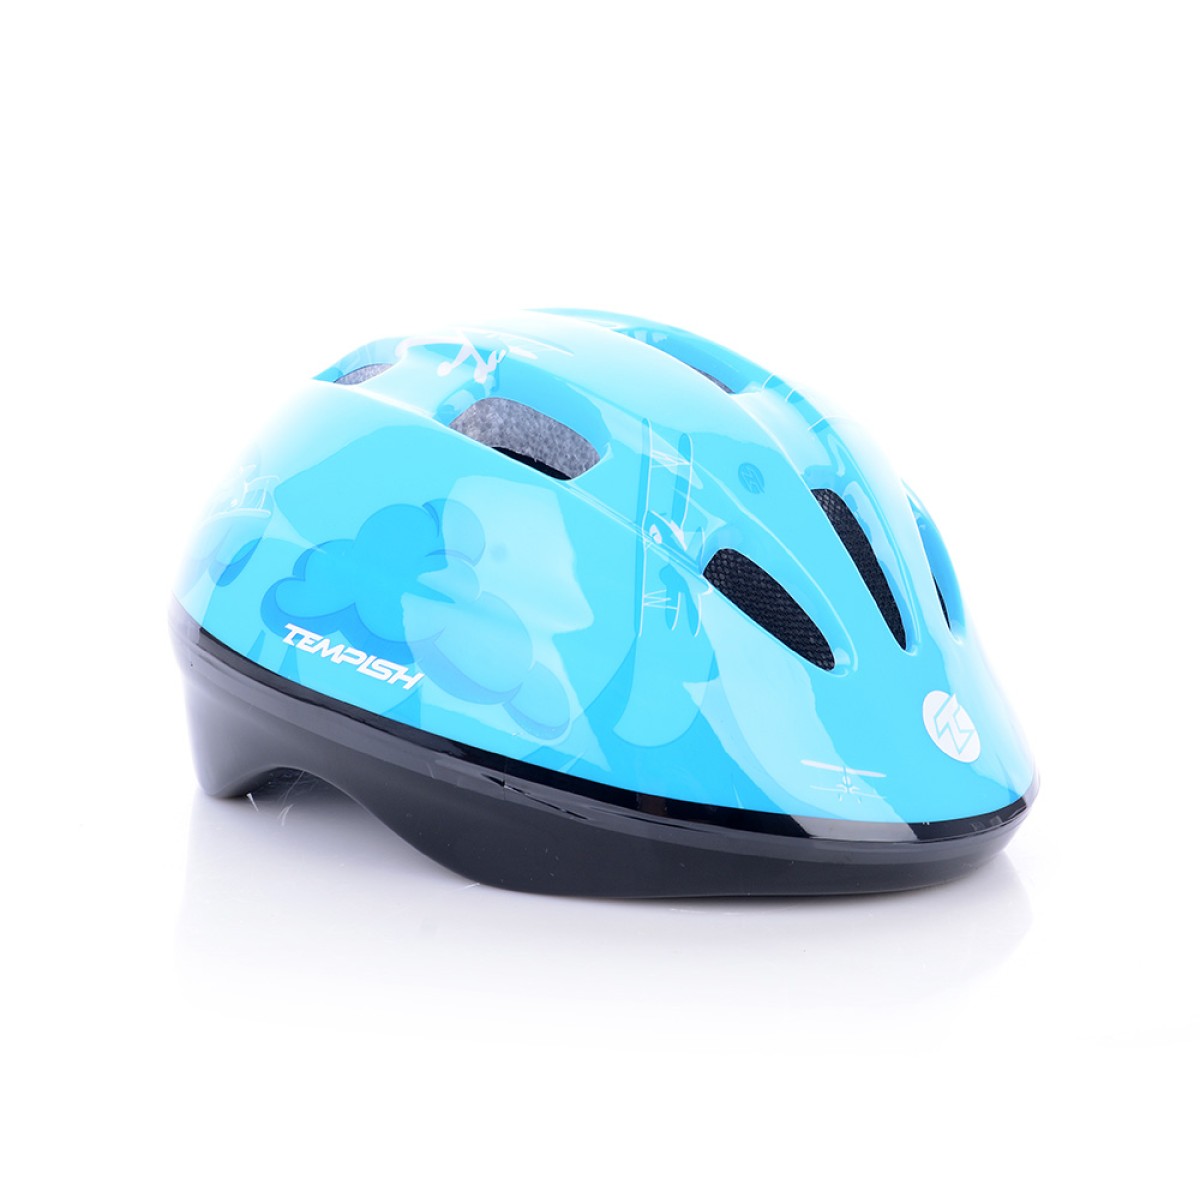 RAYBOW helmet for boards, skates or bicycles blue TEMPISH - view 4